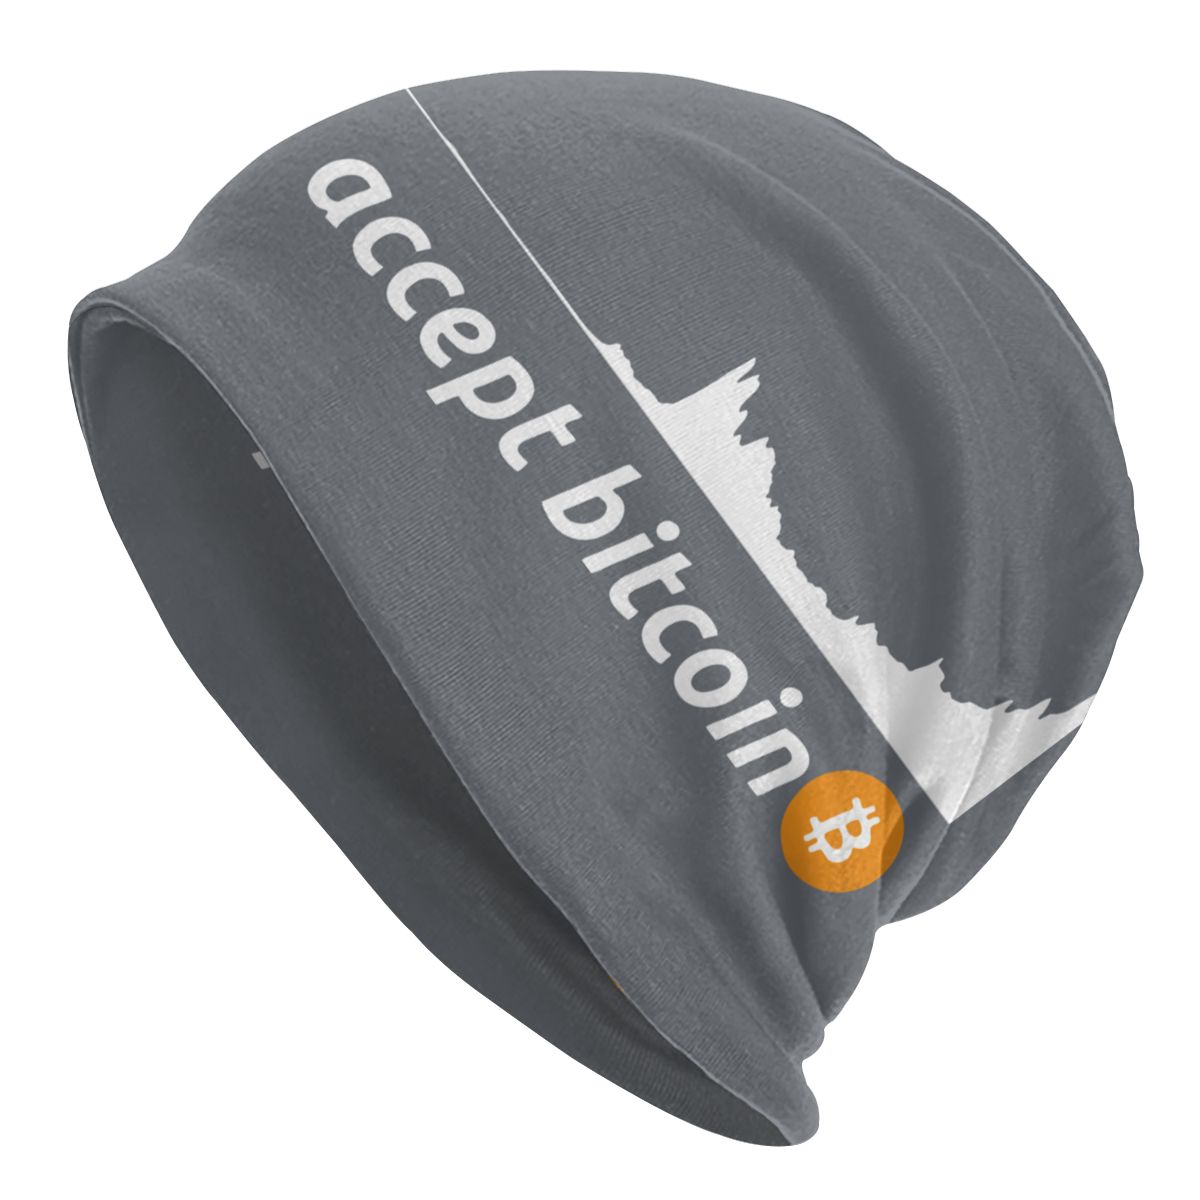 Accept Bitcoin knitted hat